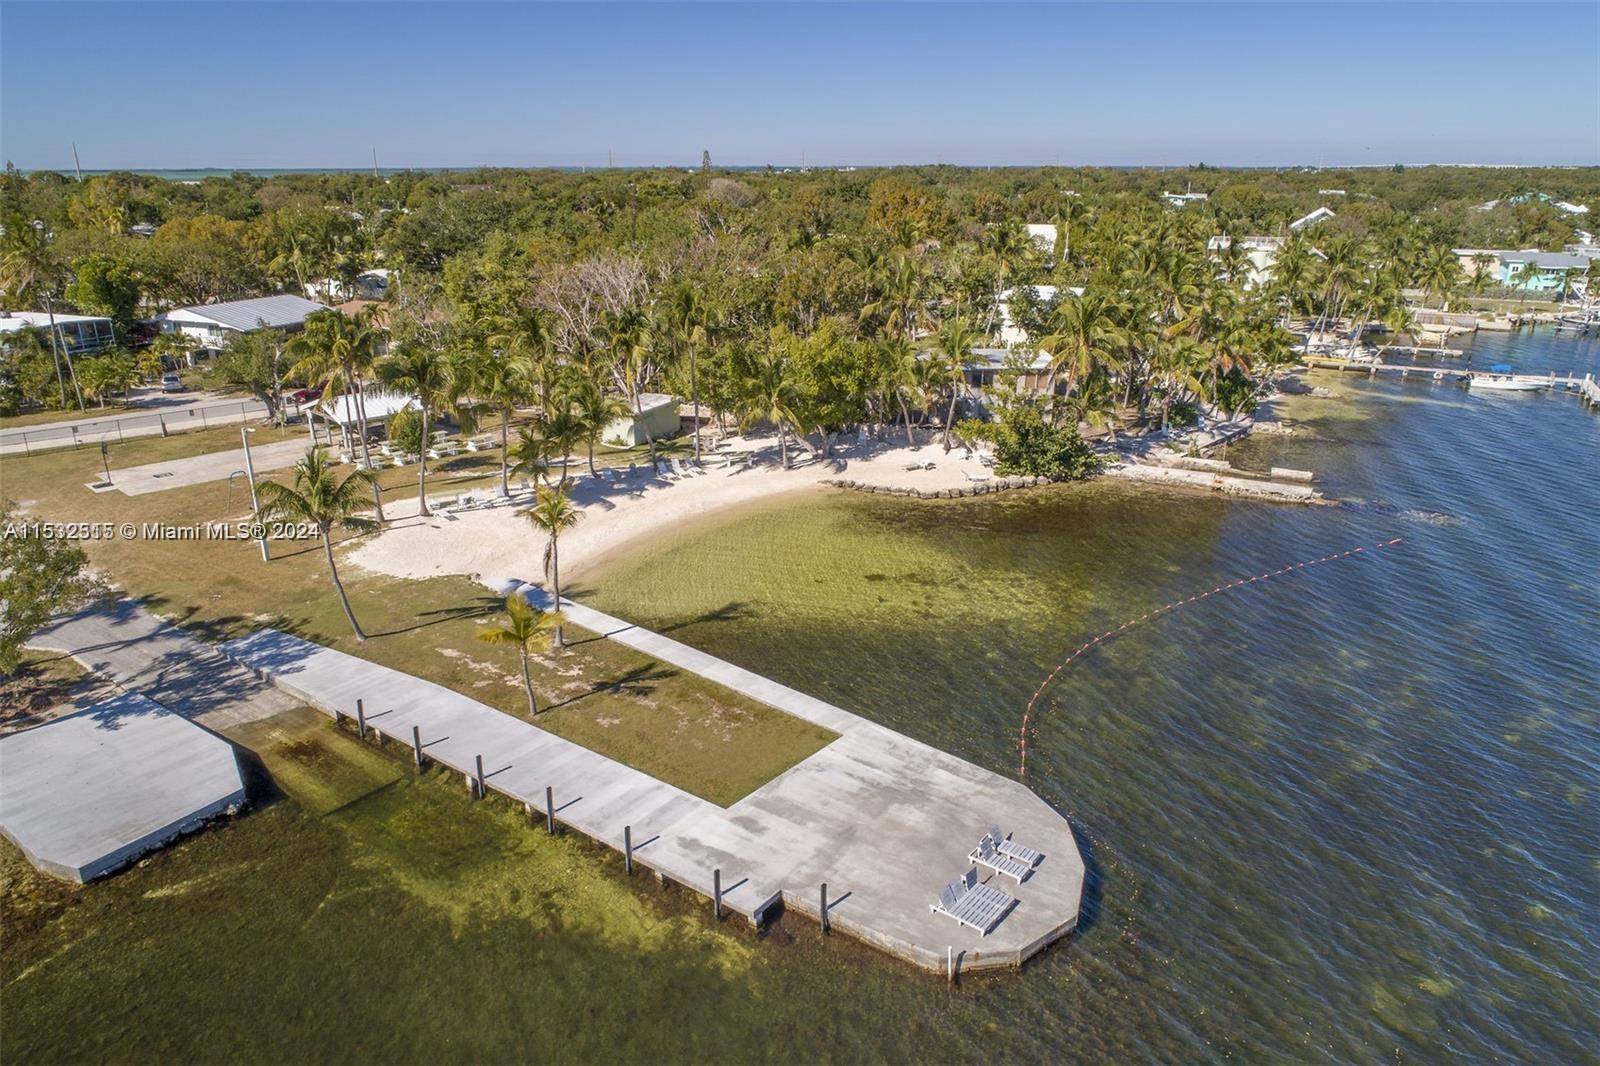 Great Family vacation home in Key Largo Florida, Great for Snow Birds leasing time frame optional.